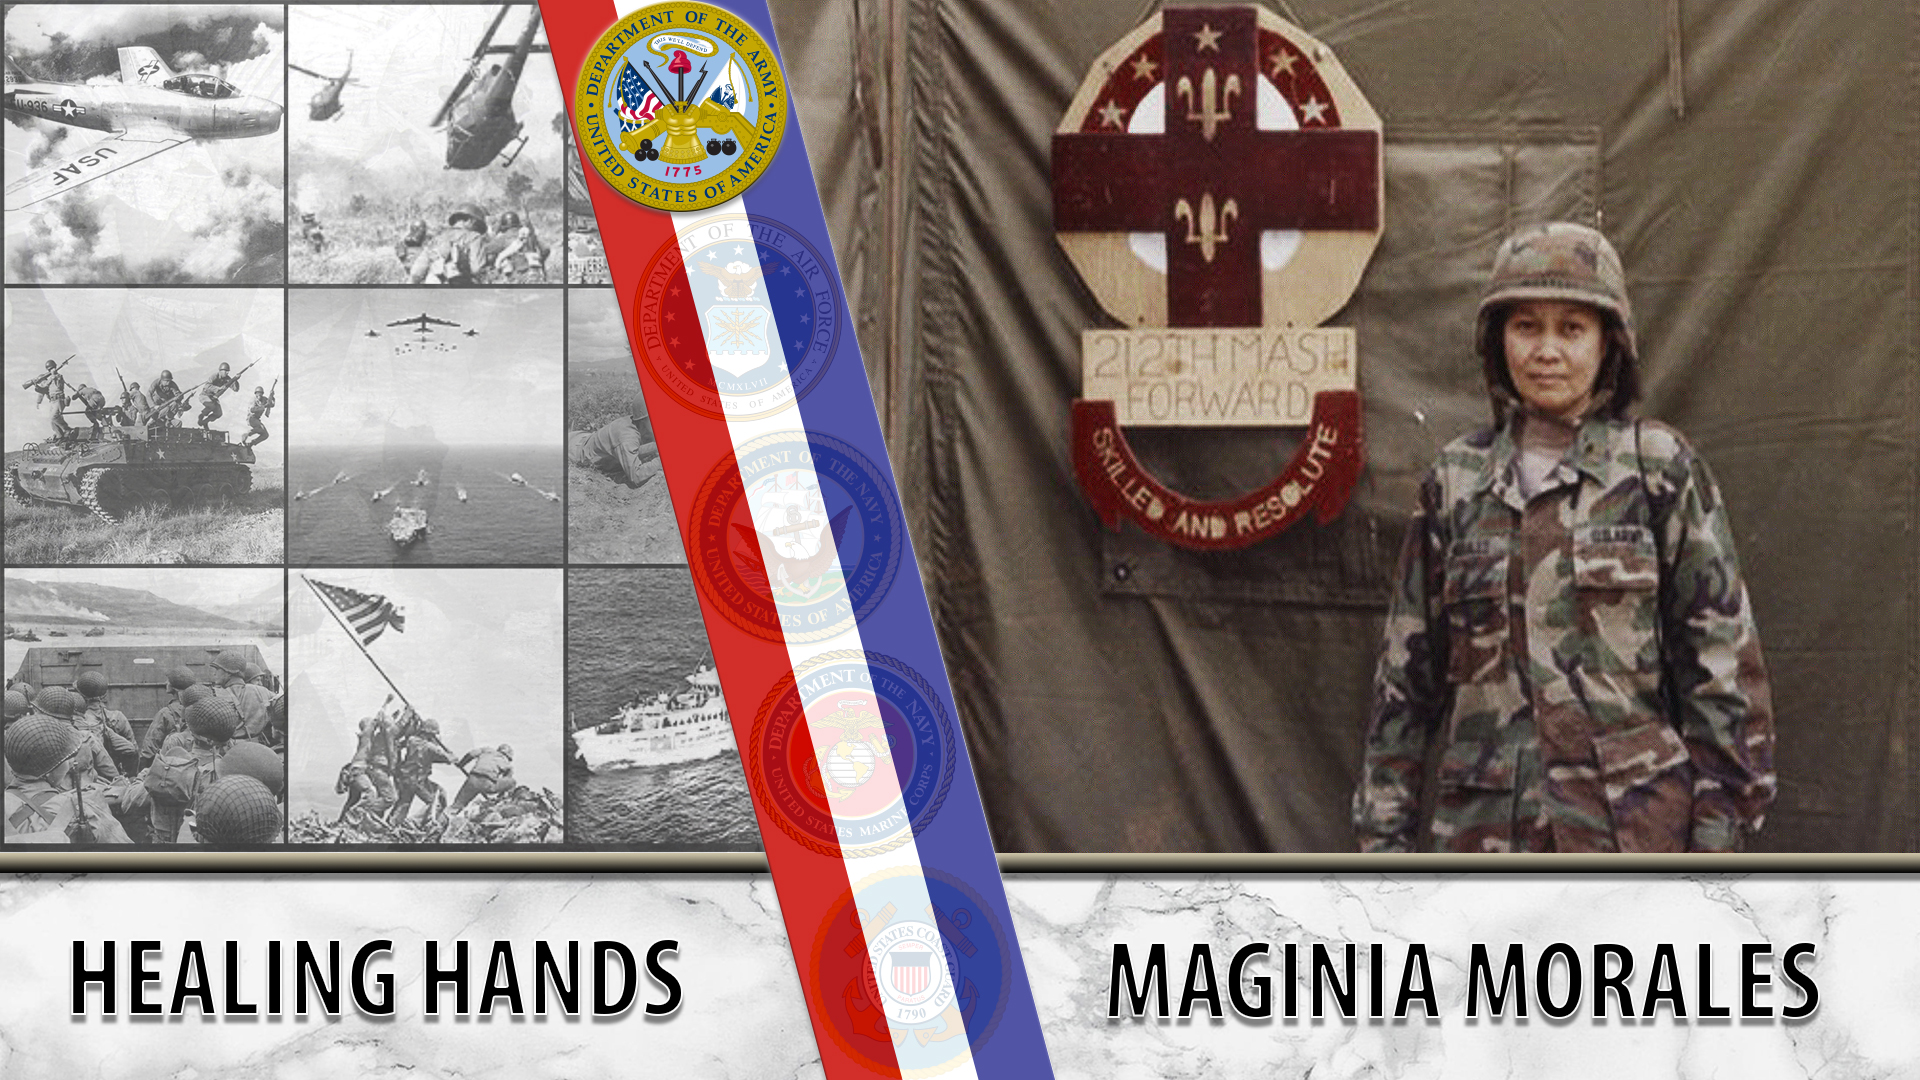 Maginia Morales left her family in the Philippines to come to America for a better life. As a nurse, she enlisted in the Army National Guard, then became an active Army nurse officer.